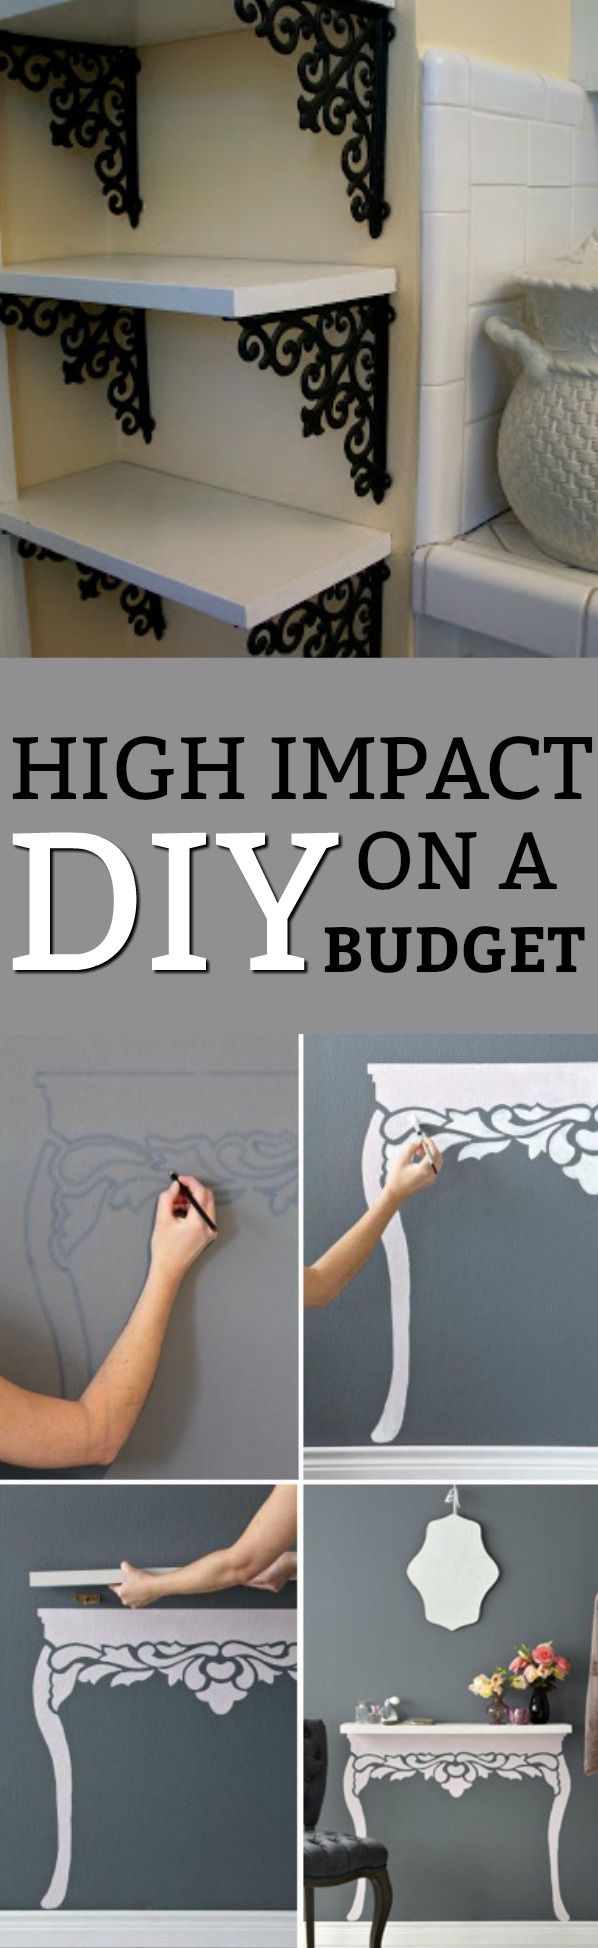 Today I want to share 17 High Impact DIYs On a Budget that will inspire you to ...